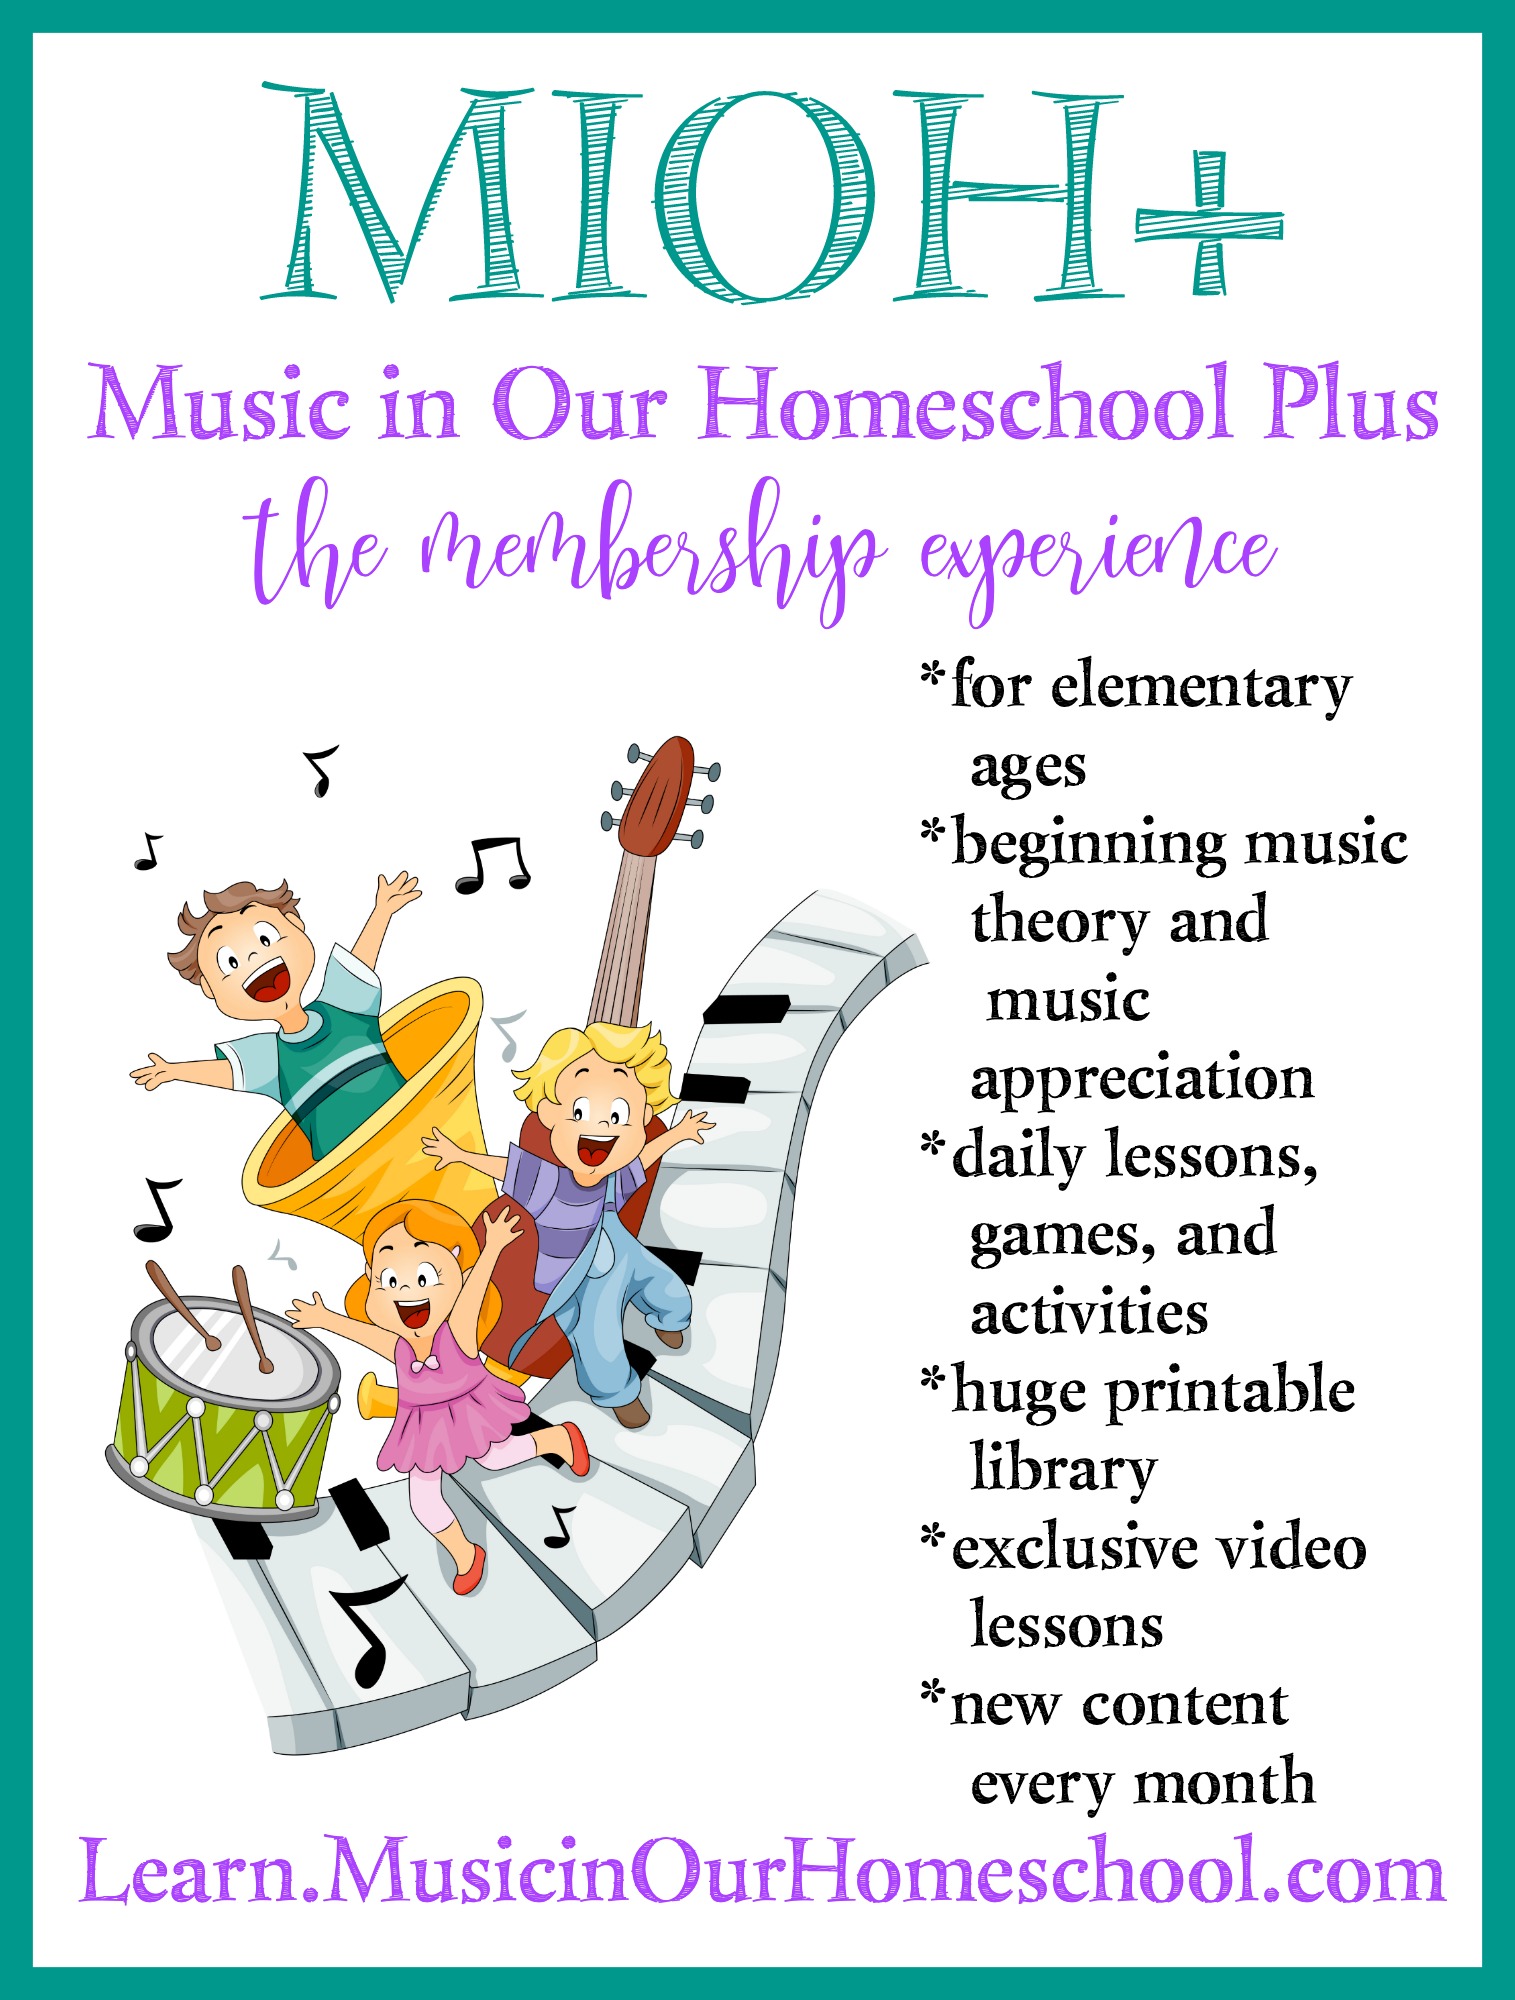 Music in Our Homeschool Plus ~ the membership experience from Learn.MusicinOurHomeschool.com for elementary students. Includes beginning music theory, music appreciation, printables, exclusive videos, and much more for homeschools or music classrooms.